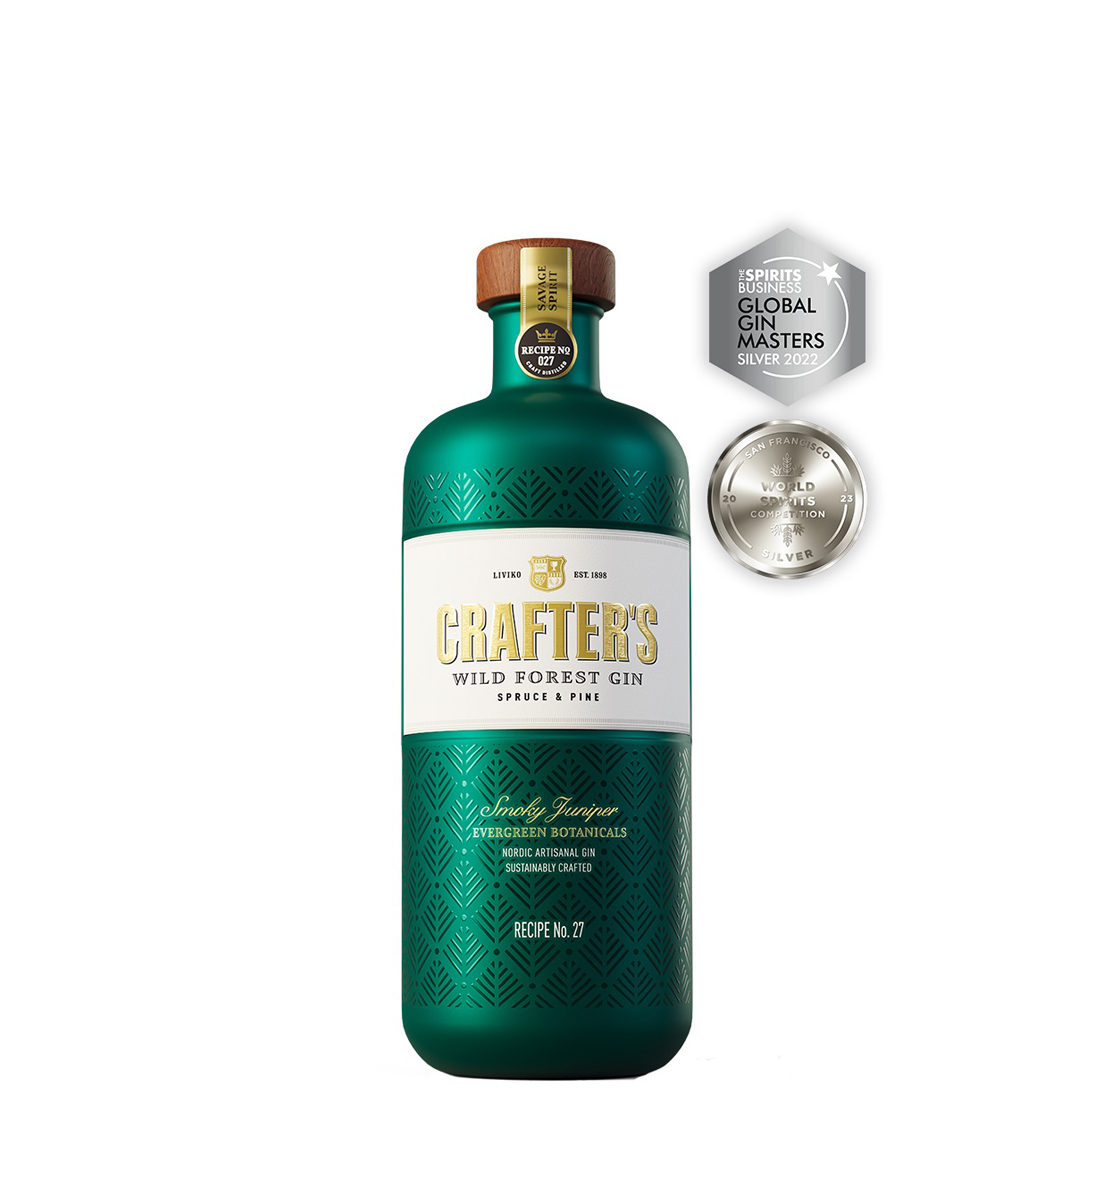 Crafters Wild Forest Gin 0.7L